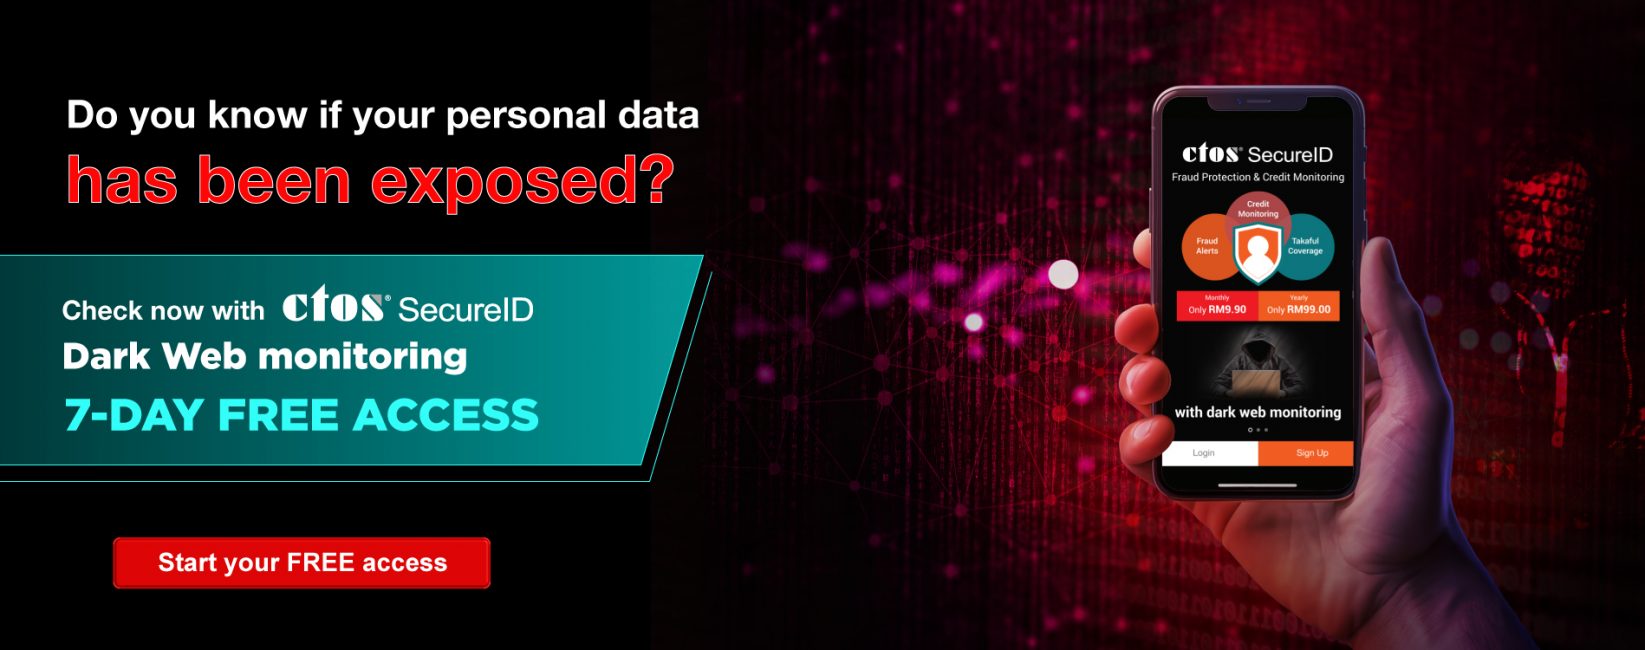 Discover-if-your-personal-data-has-been-exposed!-7-DAYS-Free-access-Desktop